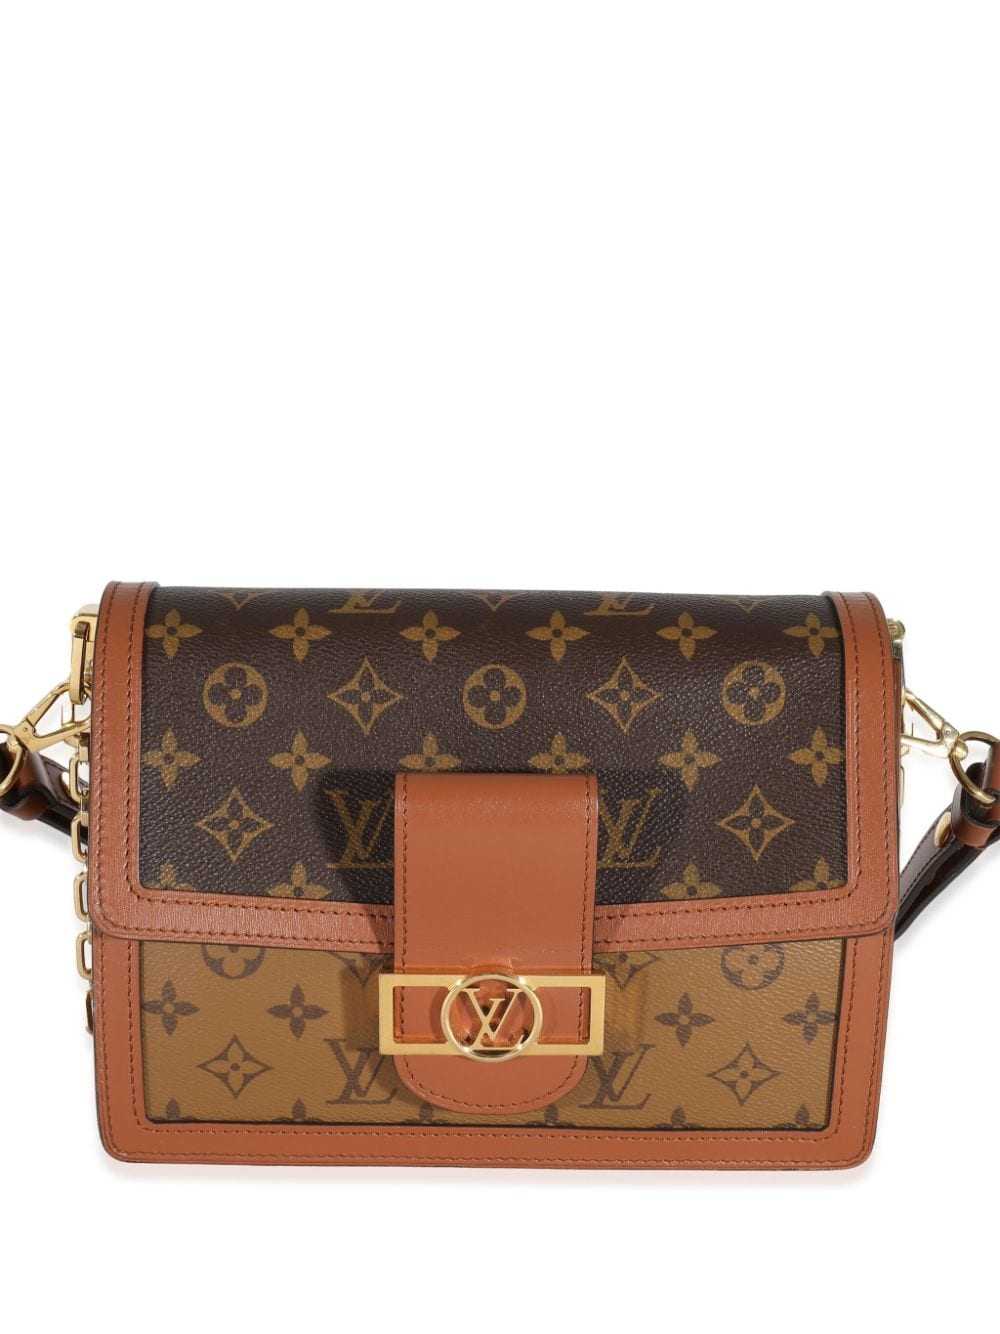 Louis Vuitton Pre-Owned 2021-2022 Dauphine MM sho… - image 5